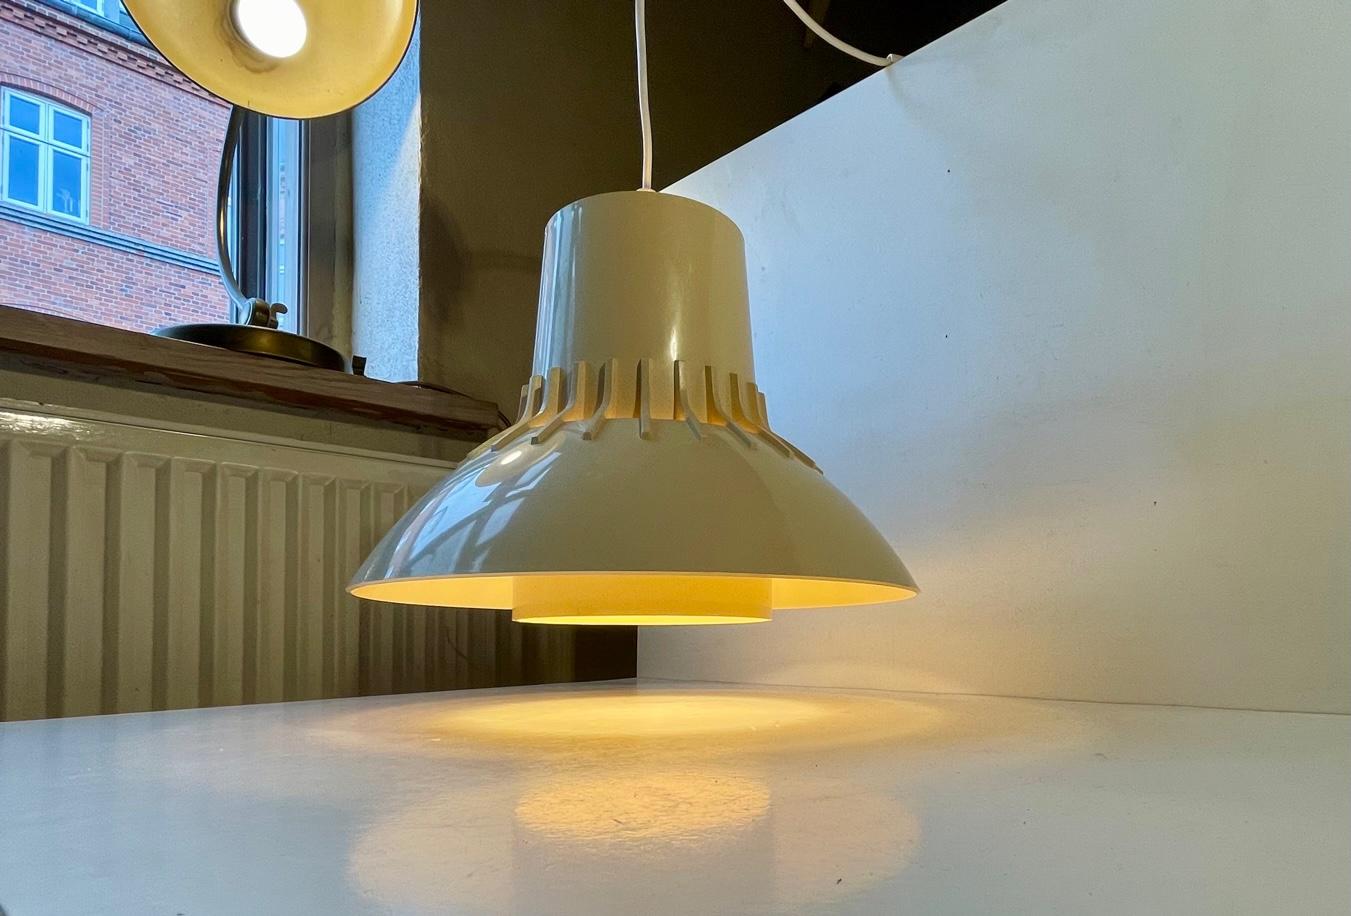 Cream-colored acrylic hanging light featuring perforations and light distributing inner shade. It was designed by Svend Middelboe in Denmark and manufactured by Nordisk Solar.Reminiscent in style to similar lights from Yasha Heifetz for French